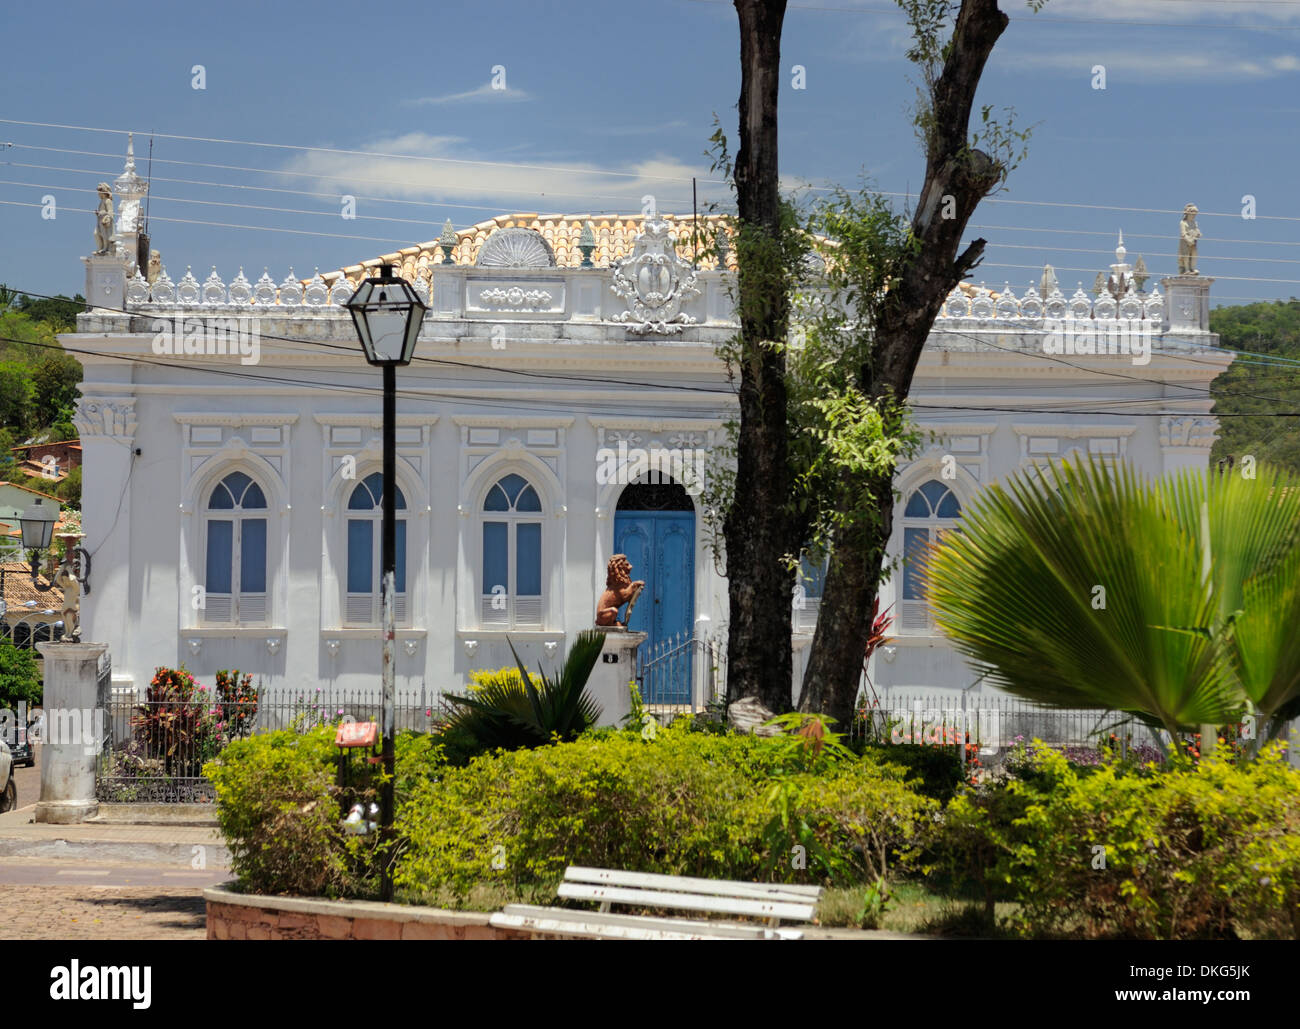 Brazil, Bahia, Lencois: Prefeitura, the old seat of government in Lencois, with its neo-classical details dating back to 1860. Stock Photo